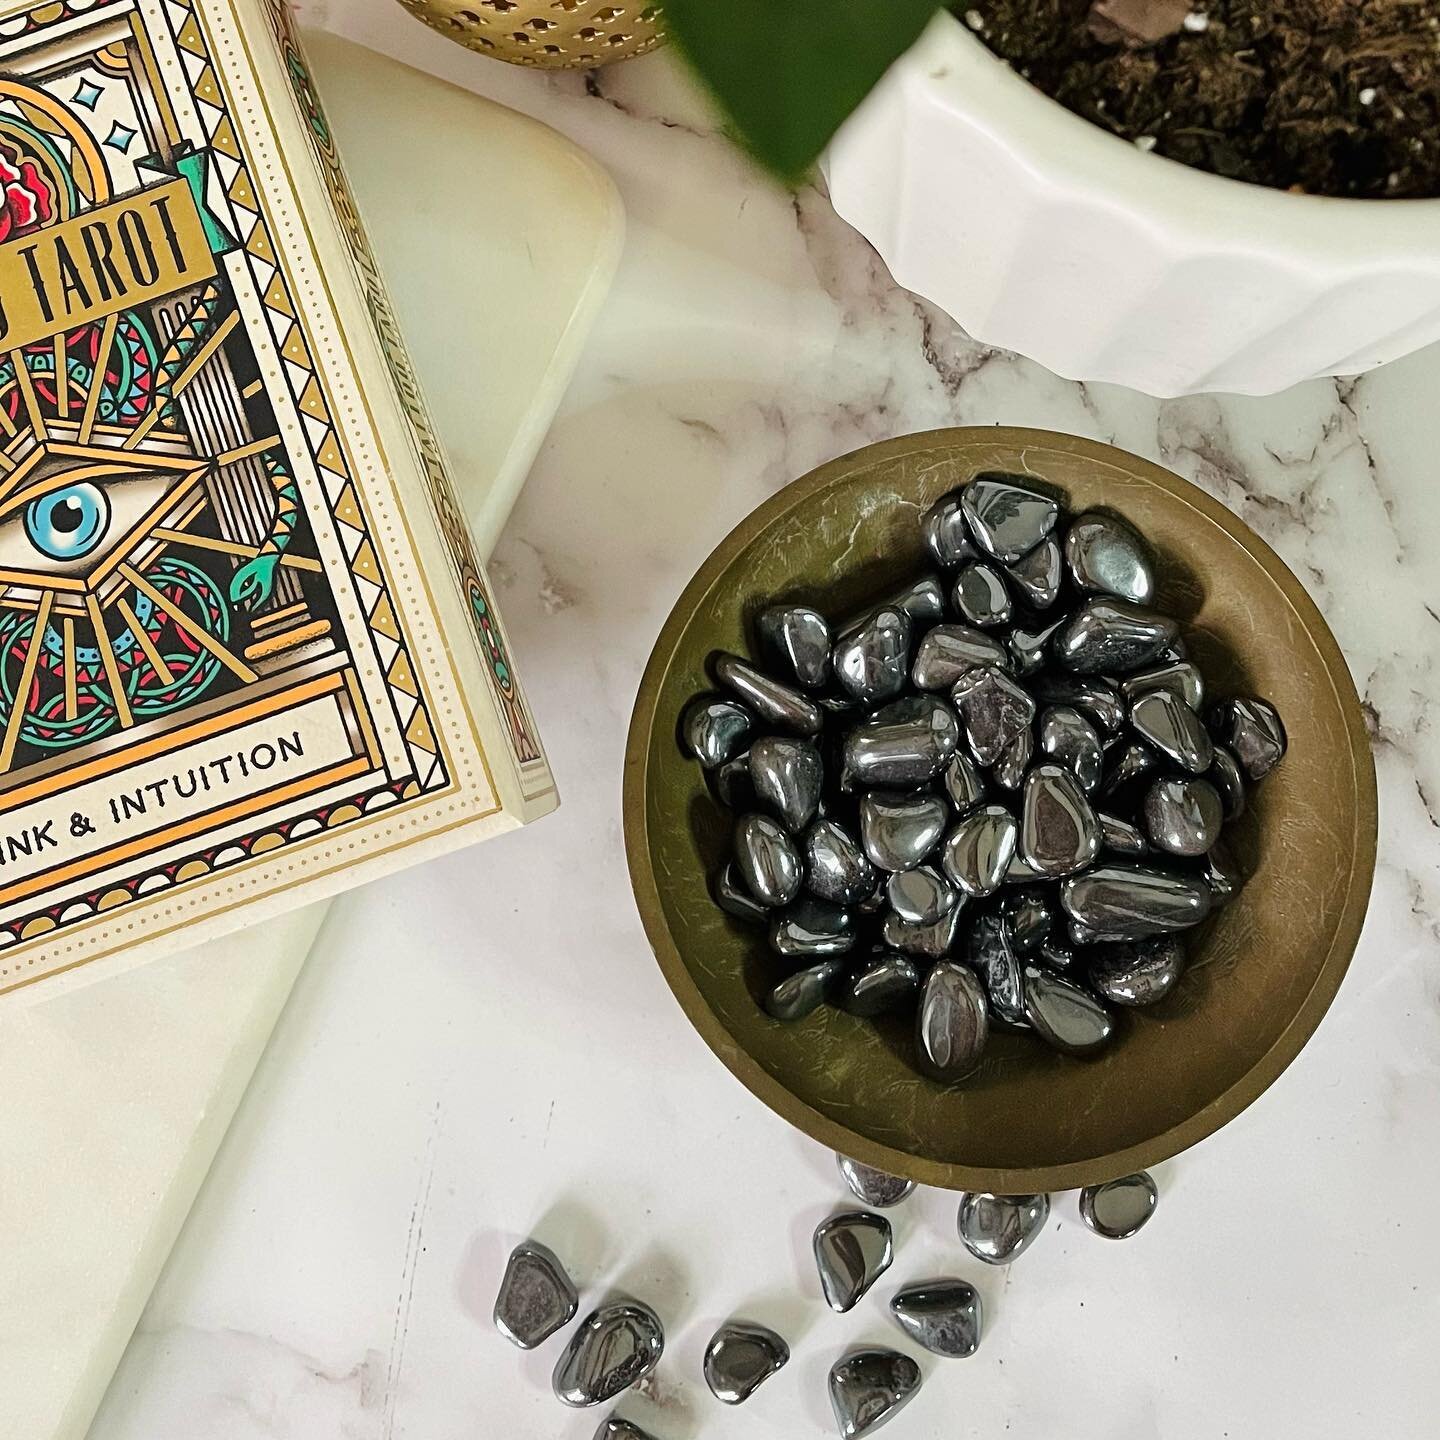 Tumbled Hematite

Hematite is a powerful and essential stone for grounding and protecting. Hematite dissolves negative energies and prevents negative energies from entering the aura. It is extremely useful for overcoming compulsions and addictions as